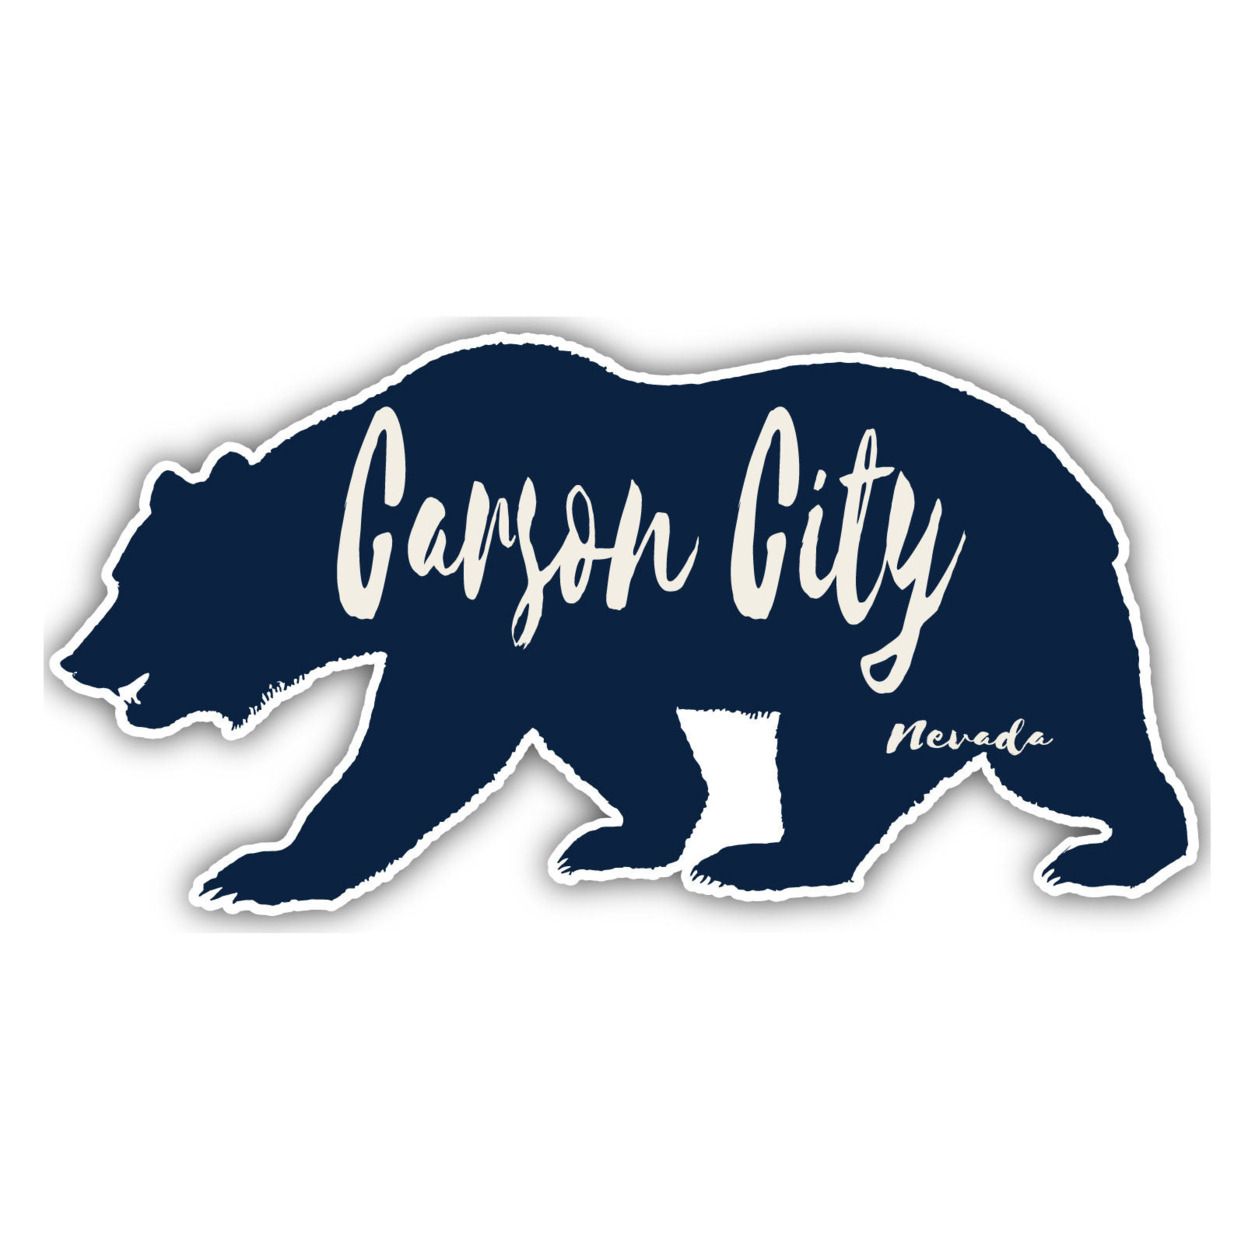 Carson City Nevada Souvenir Decorative Stickers (Choose Theme And Size) - 4-Pack, 10-Inch, Camp Life